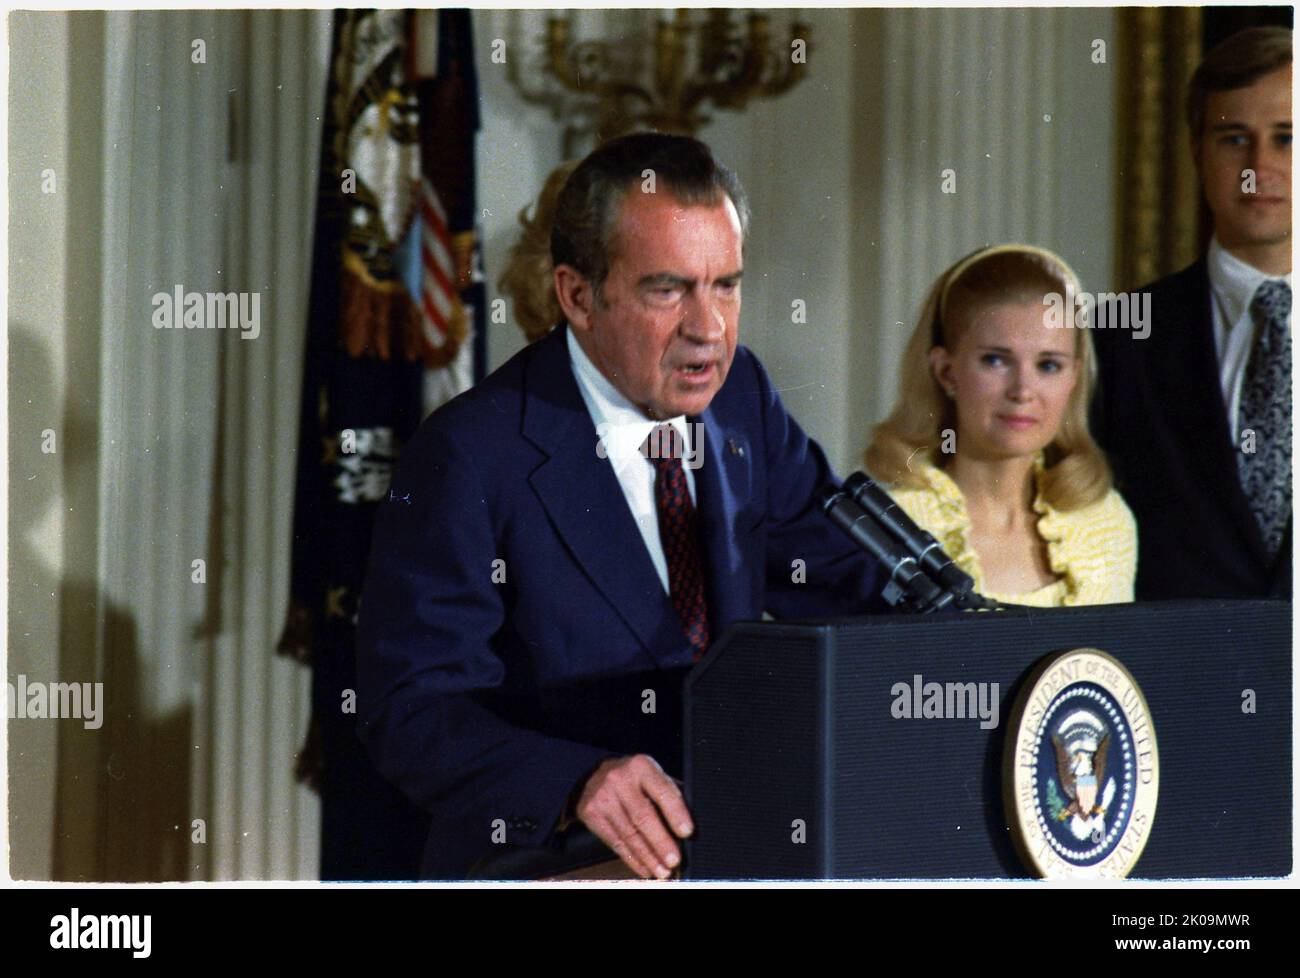 Richard Nixon (1913 - 1994) president of the United States, serving from 1969 to 1974. A member of the Republican Party, Nixon previously served as the 36th vice president from 1953 to 1961, he became the only president to resign from the office, following the Watergate scandal. Stock Photo